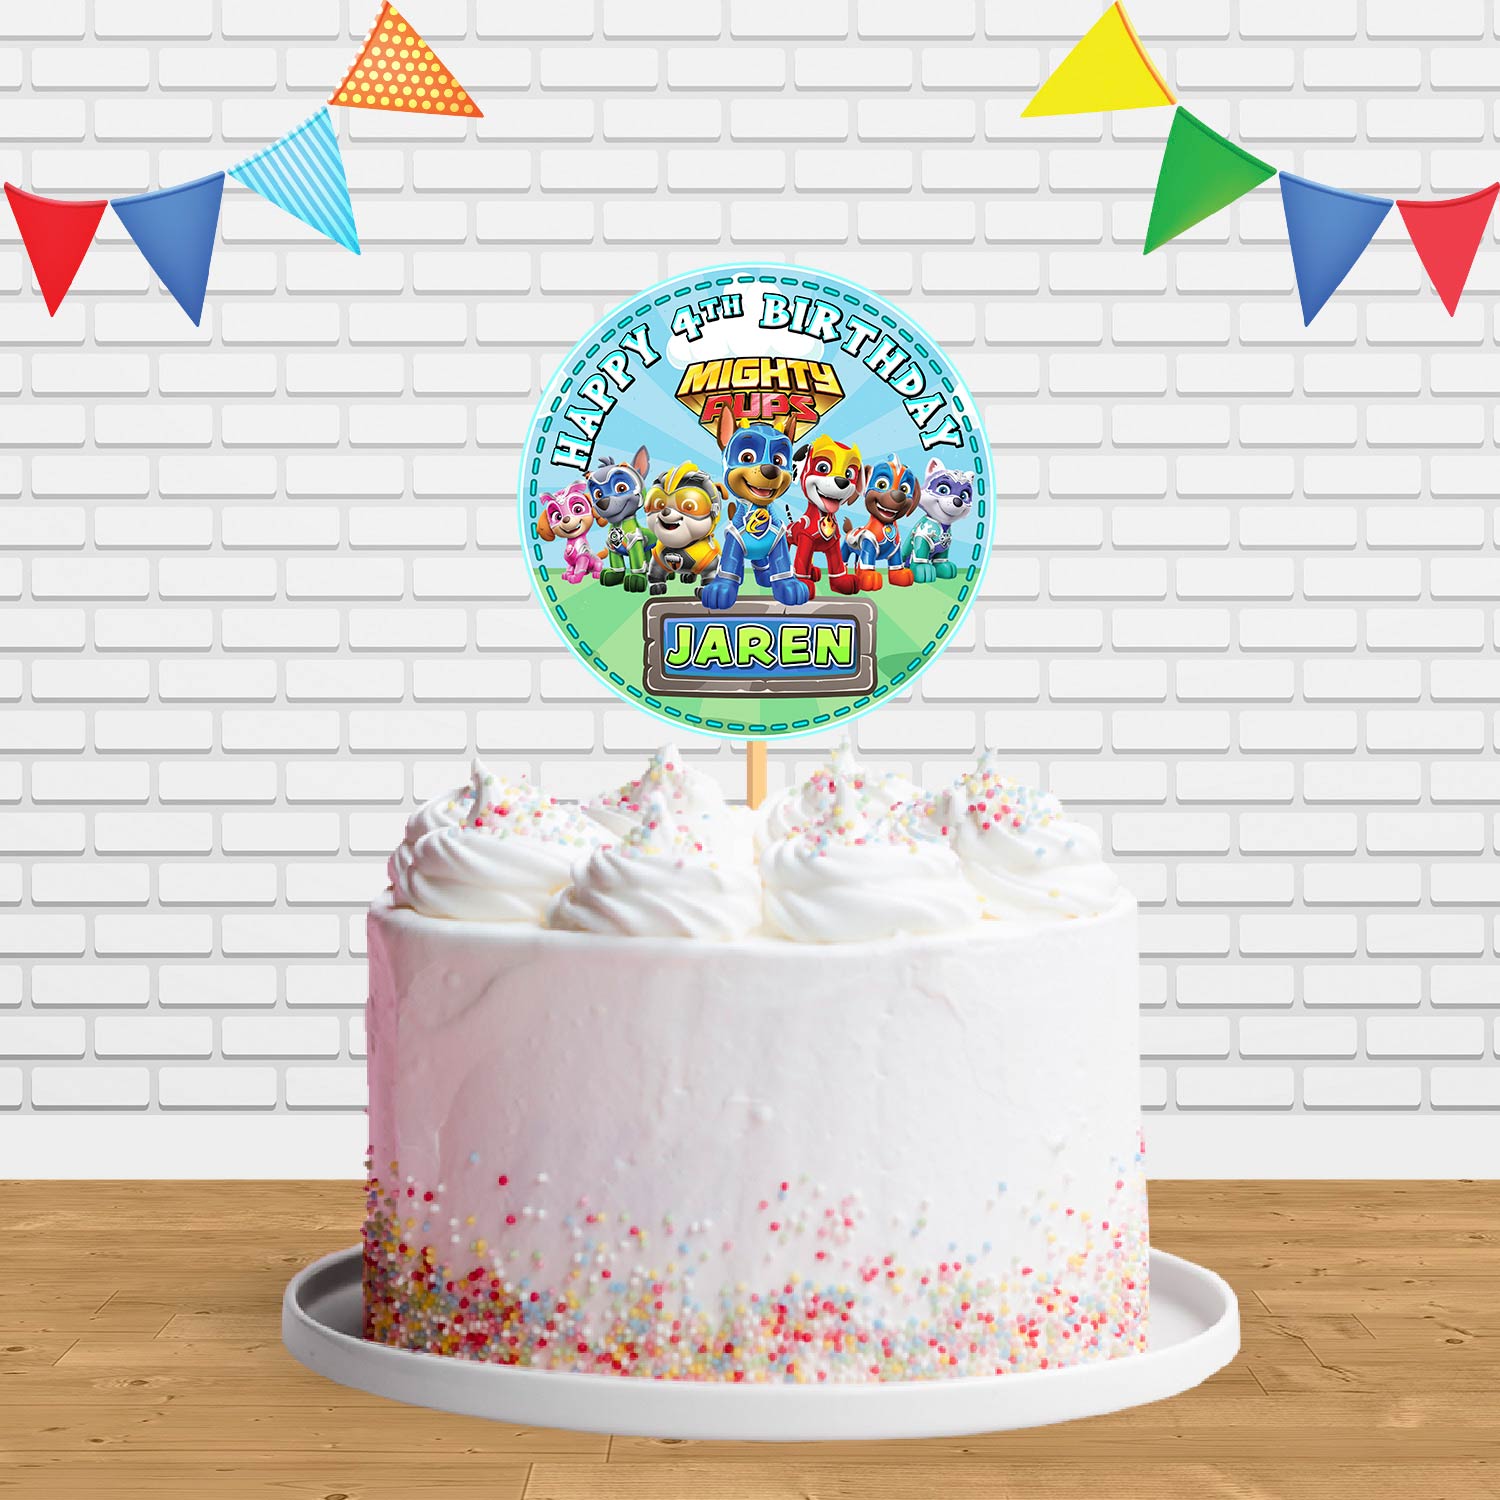 Mighty Pups PAW Patrol Edible Cake Toppers – Ediblecakeimage